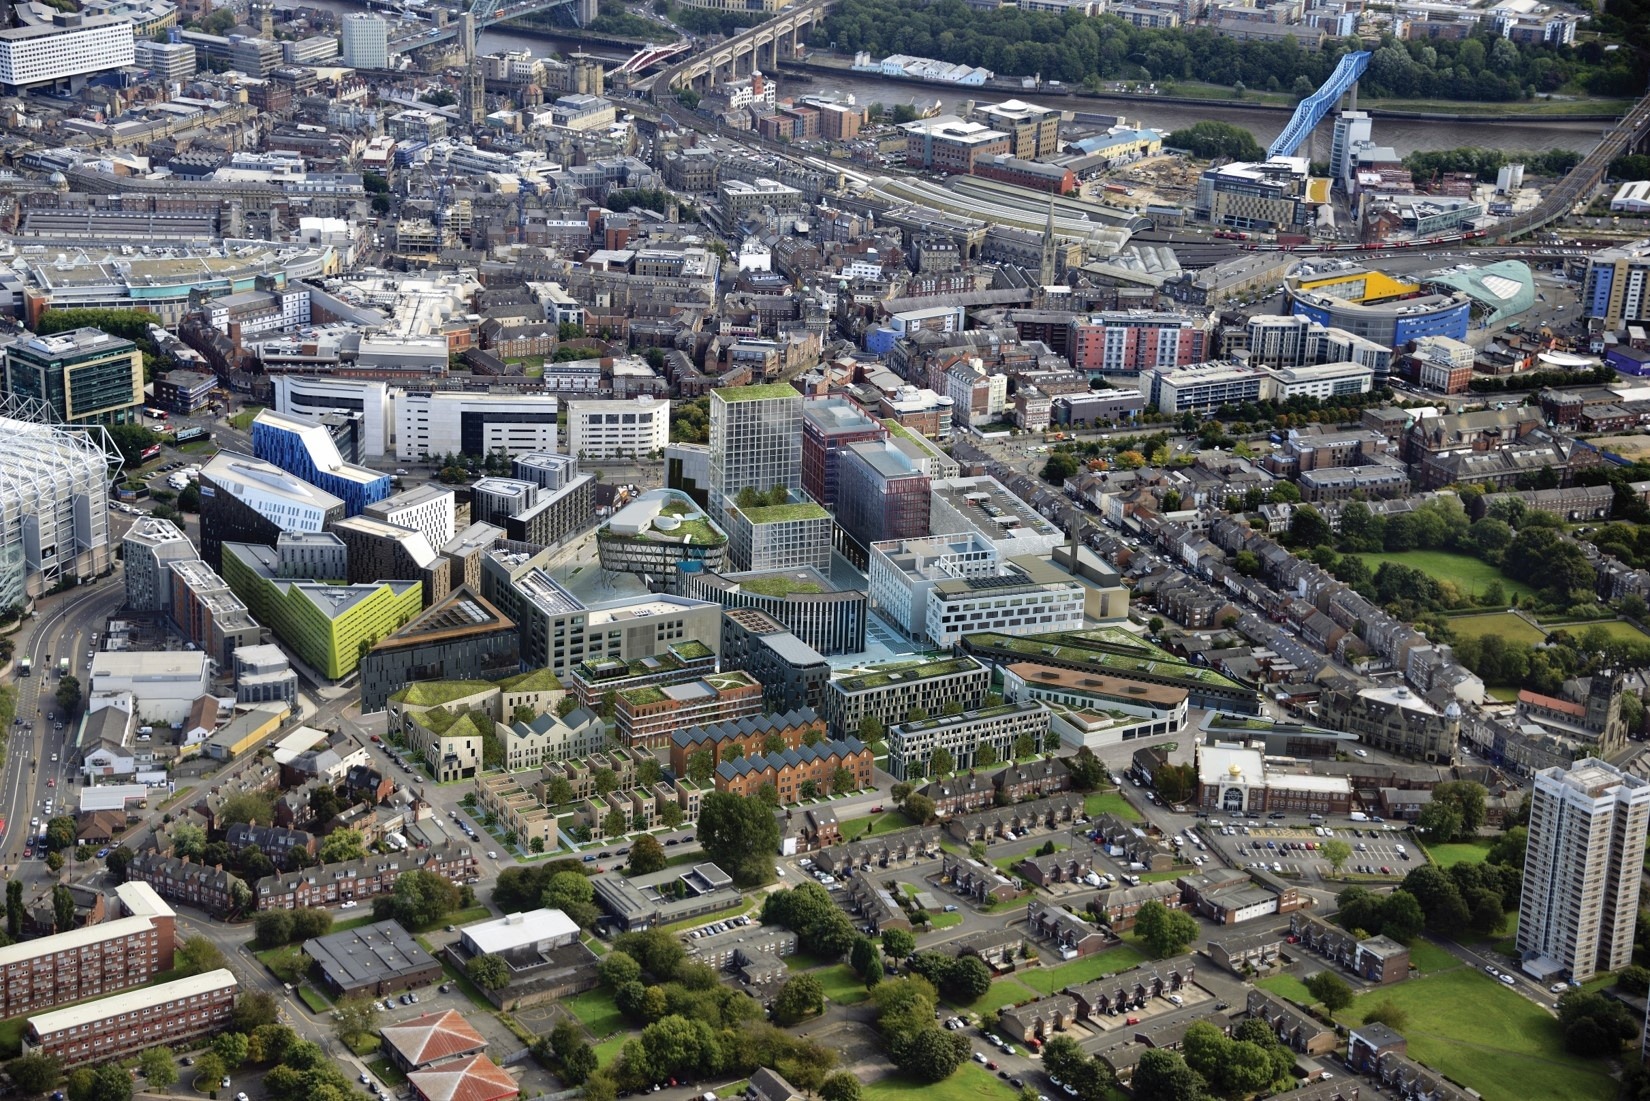 Newcastle Helix aerial view
Needs to include credit: Image Credit: Render 3D. Subject to planning approval